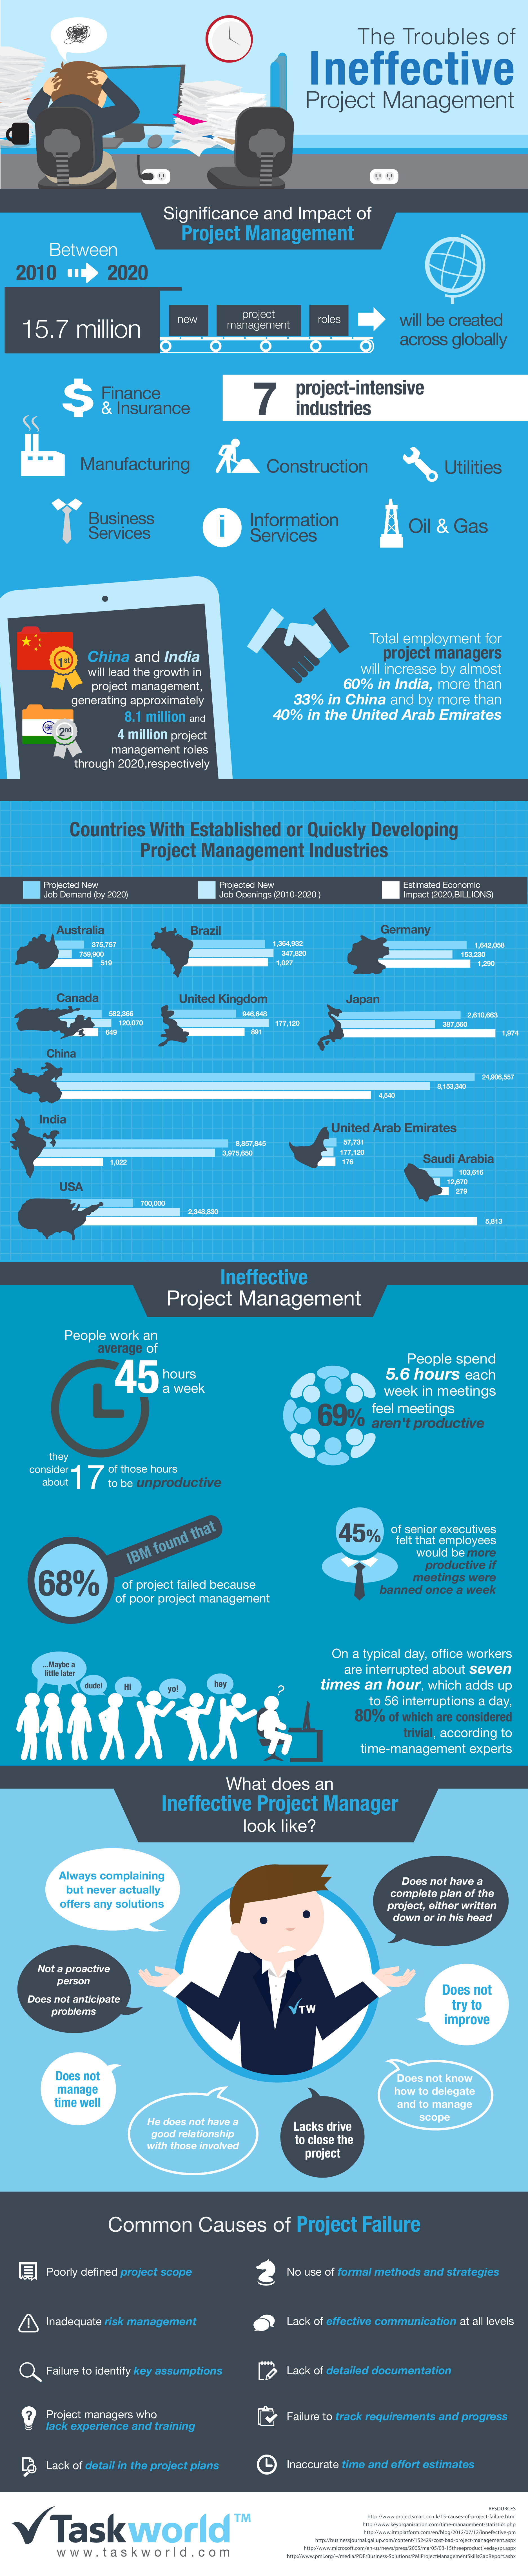 The Troubles of Ineffective Project Management Infographic